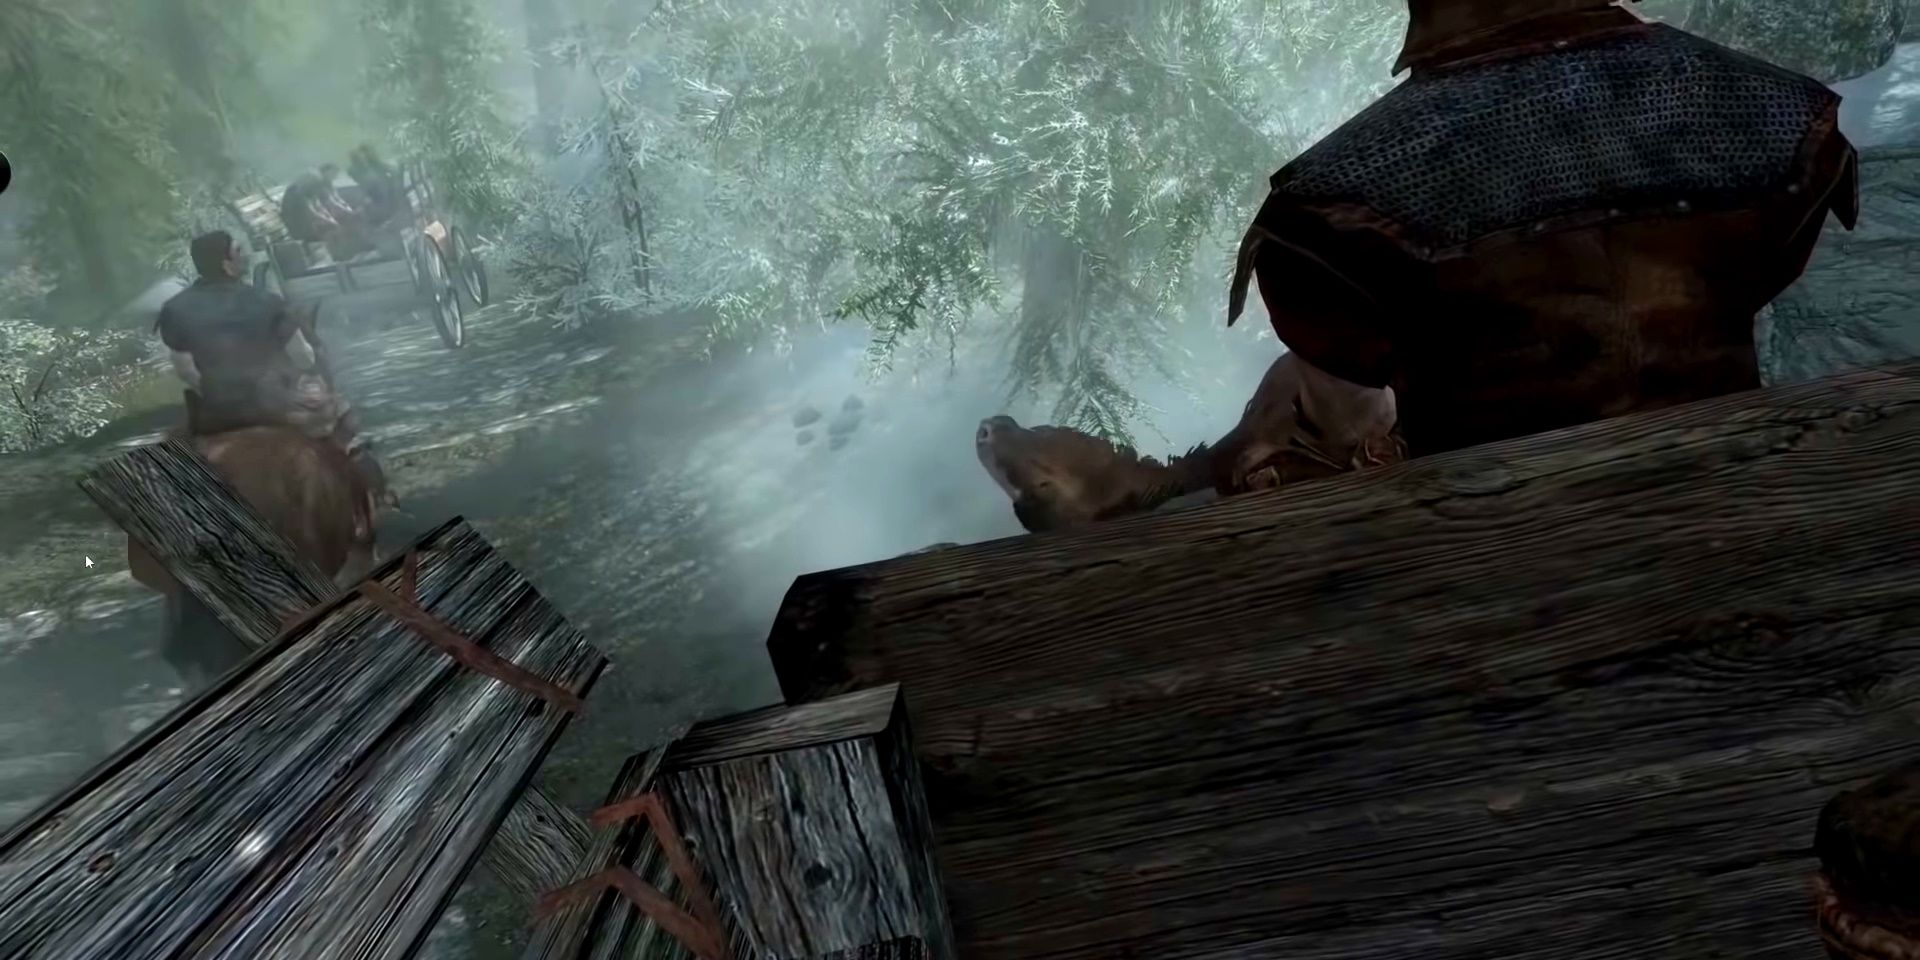 Skyrim opening scene with the rest of the convoy carrying on as the player carriage is stuck because the horse is partially in the ground and sideways